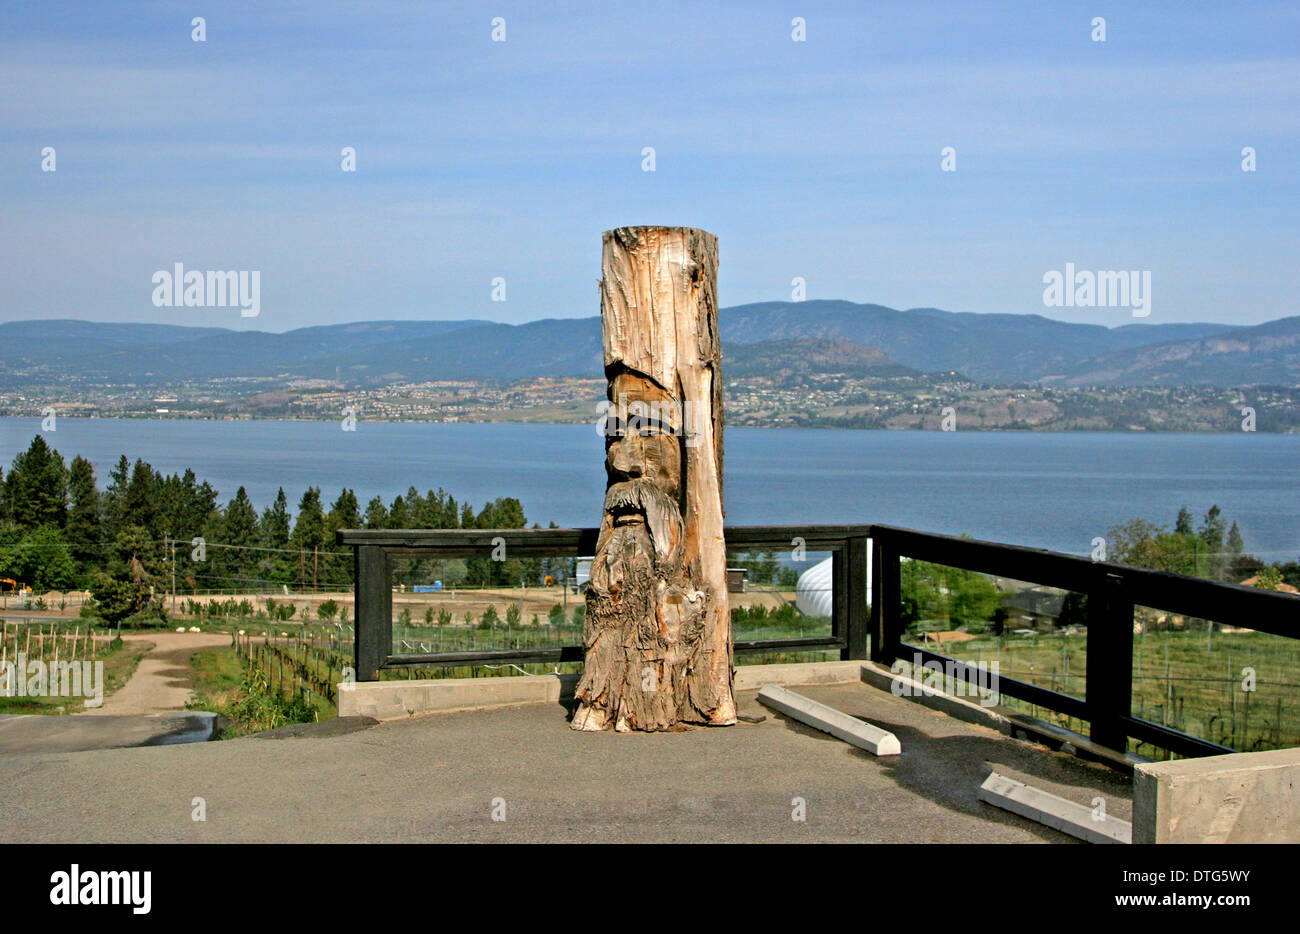 Giant Wooden Carving /Sculpture on the Shores of Okanagan Lake BC Canada Stock Photo